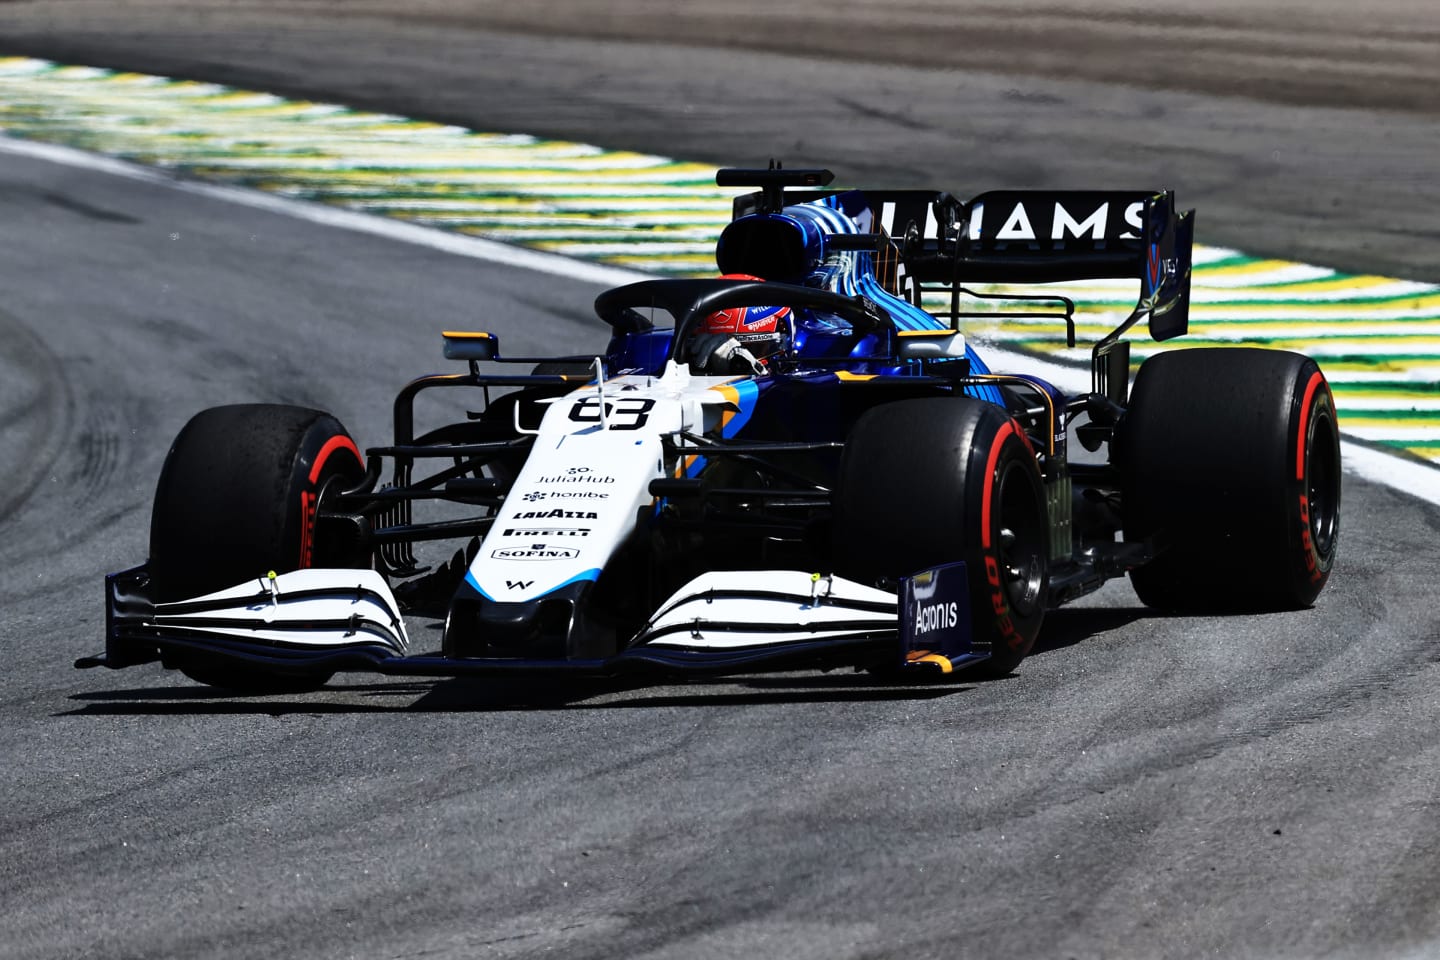 SAO PAULO, BRAZIL - NOVEMBER 14: George Russell of Great Britain driving the (63) Williams Racing FW43B Mercedes on his way to the grid before the F1 Grand Prix of Brazil at Autodromo Jose Carlos Pace on November 14, 2021 in Sao Paulo, Brazil. (Photo by Buda Mendes/Getty Images)